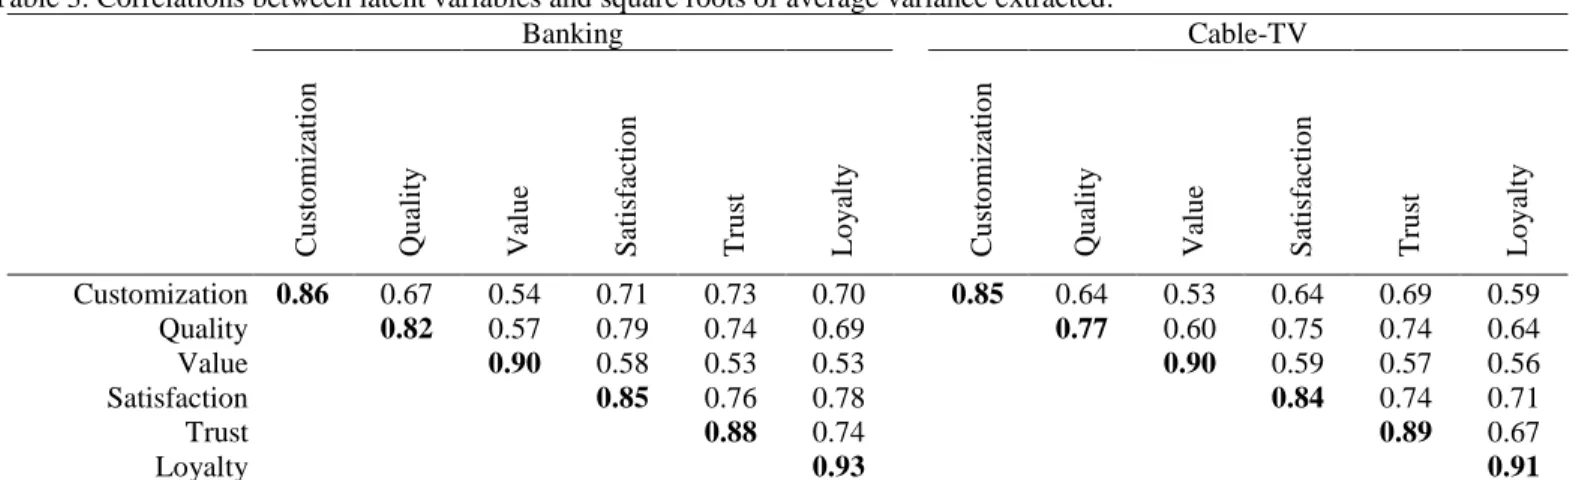 Table 3. Correlations between latent variables and square roots of average variance extracted